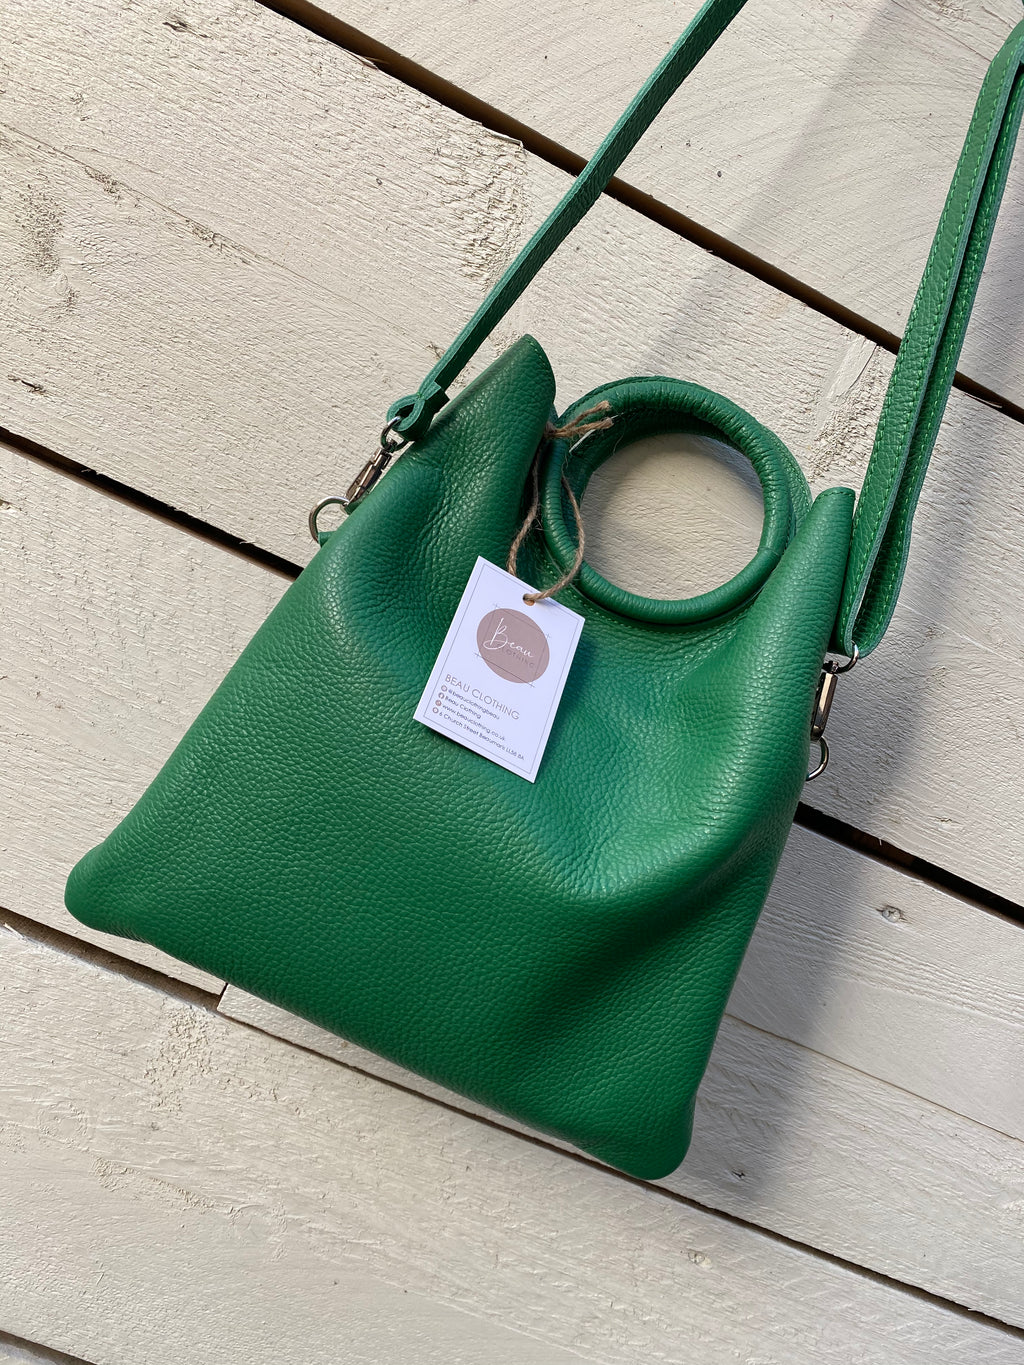 Real leather bag - green